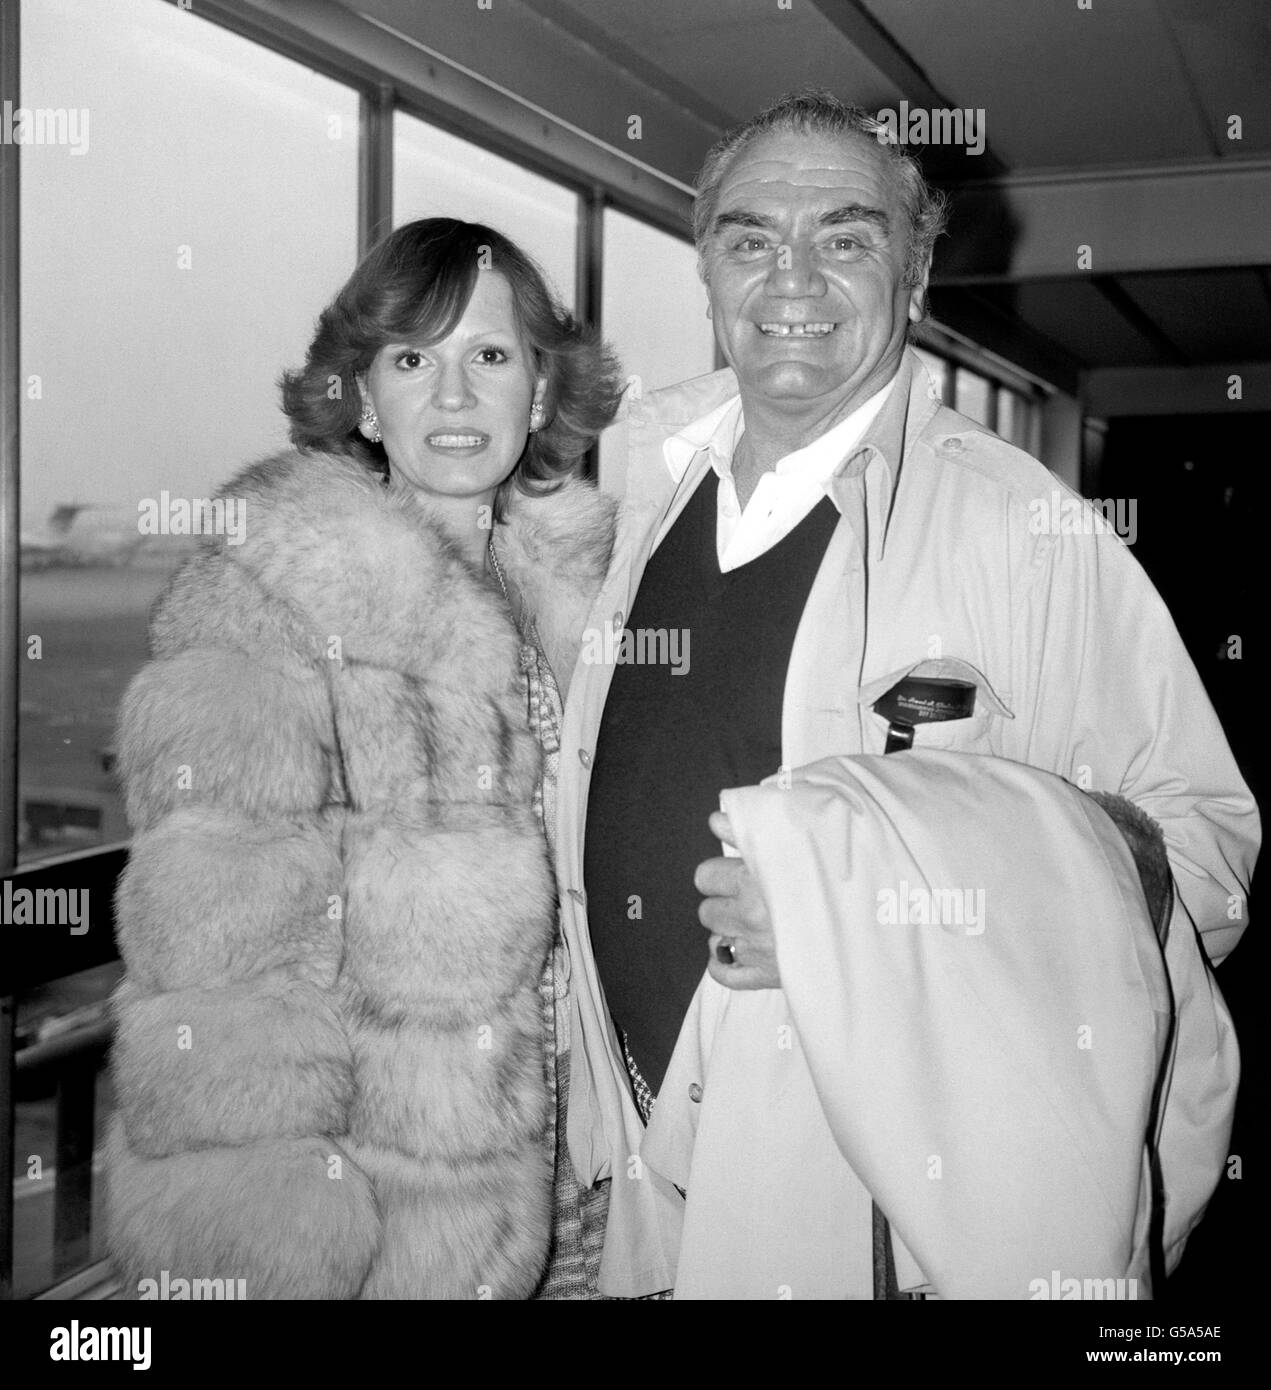 American actor Ernest Borgnine and his Norwegian-born fifth wife Tove at Heathrow Airport. They were passing through on their way to Los Angeles from Rome where Mr Borgnine has been making a movie called 'The Diaries of Miss X' Stock Photo